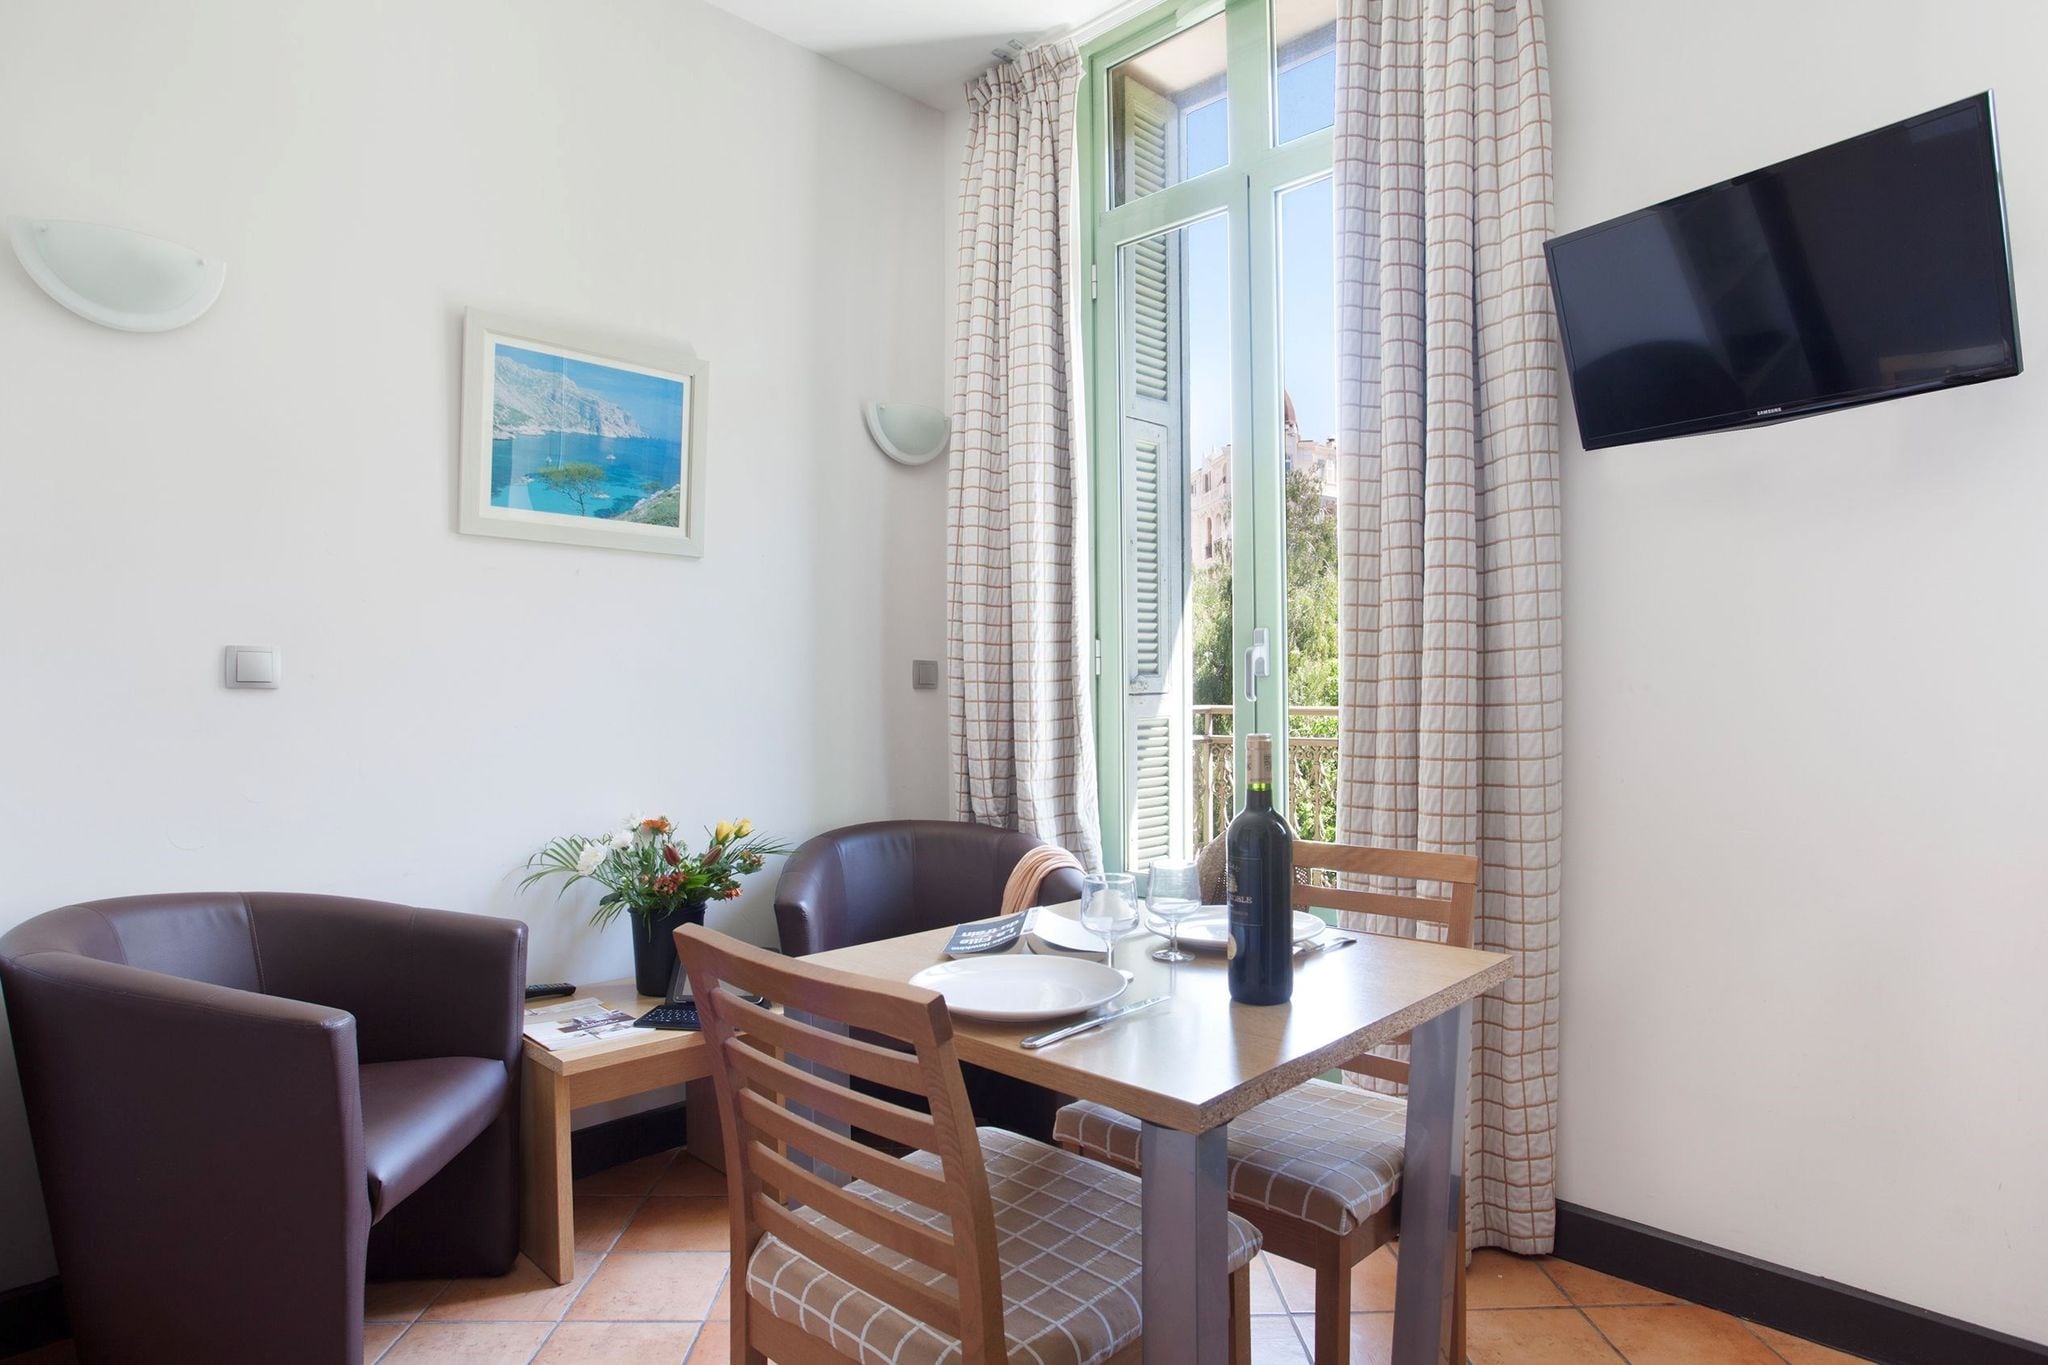 Stately apartment in a former hotel in the heart of Nice